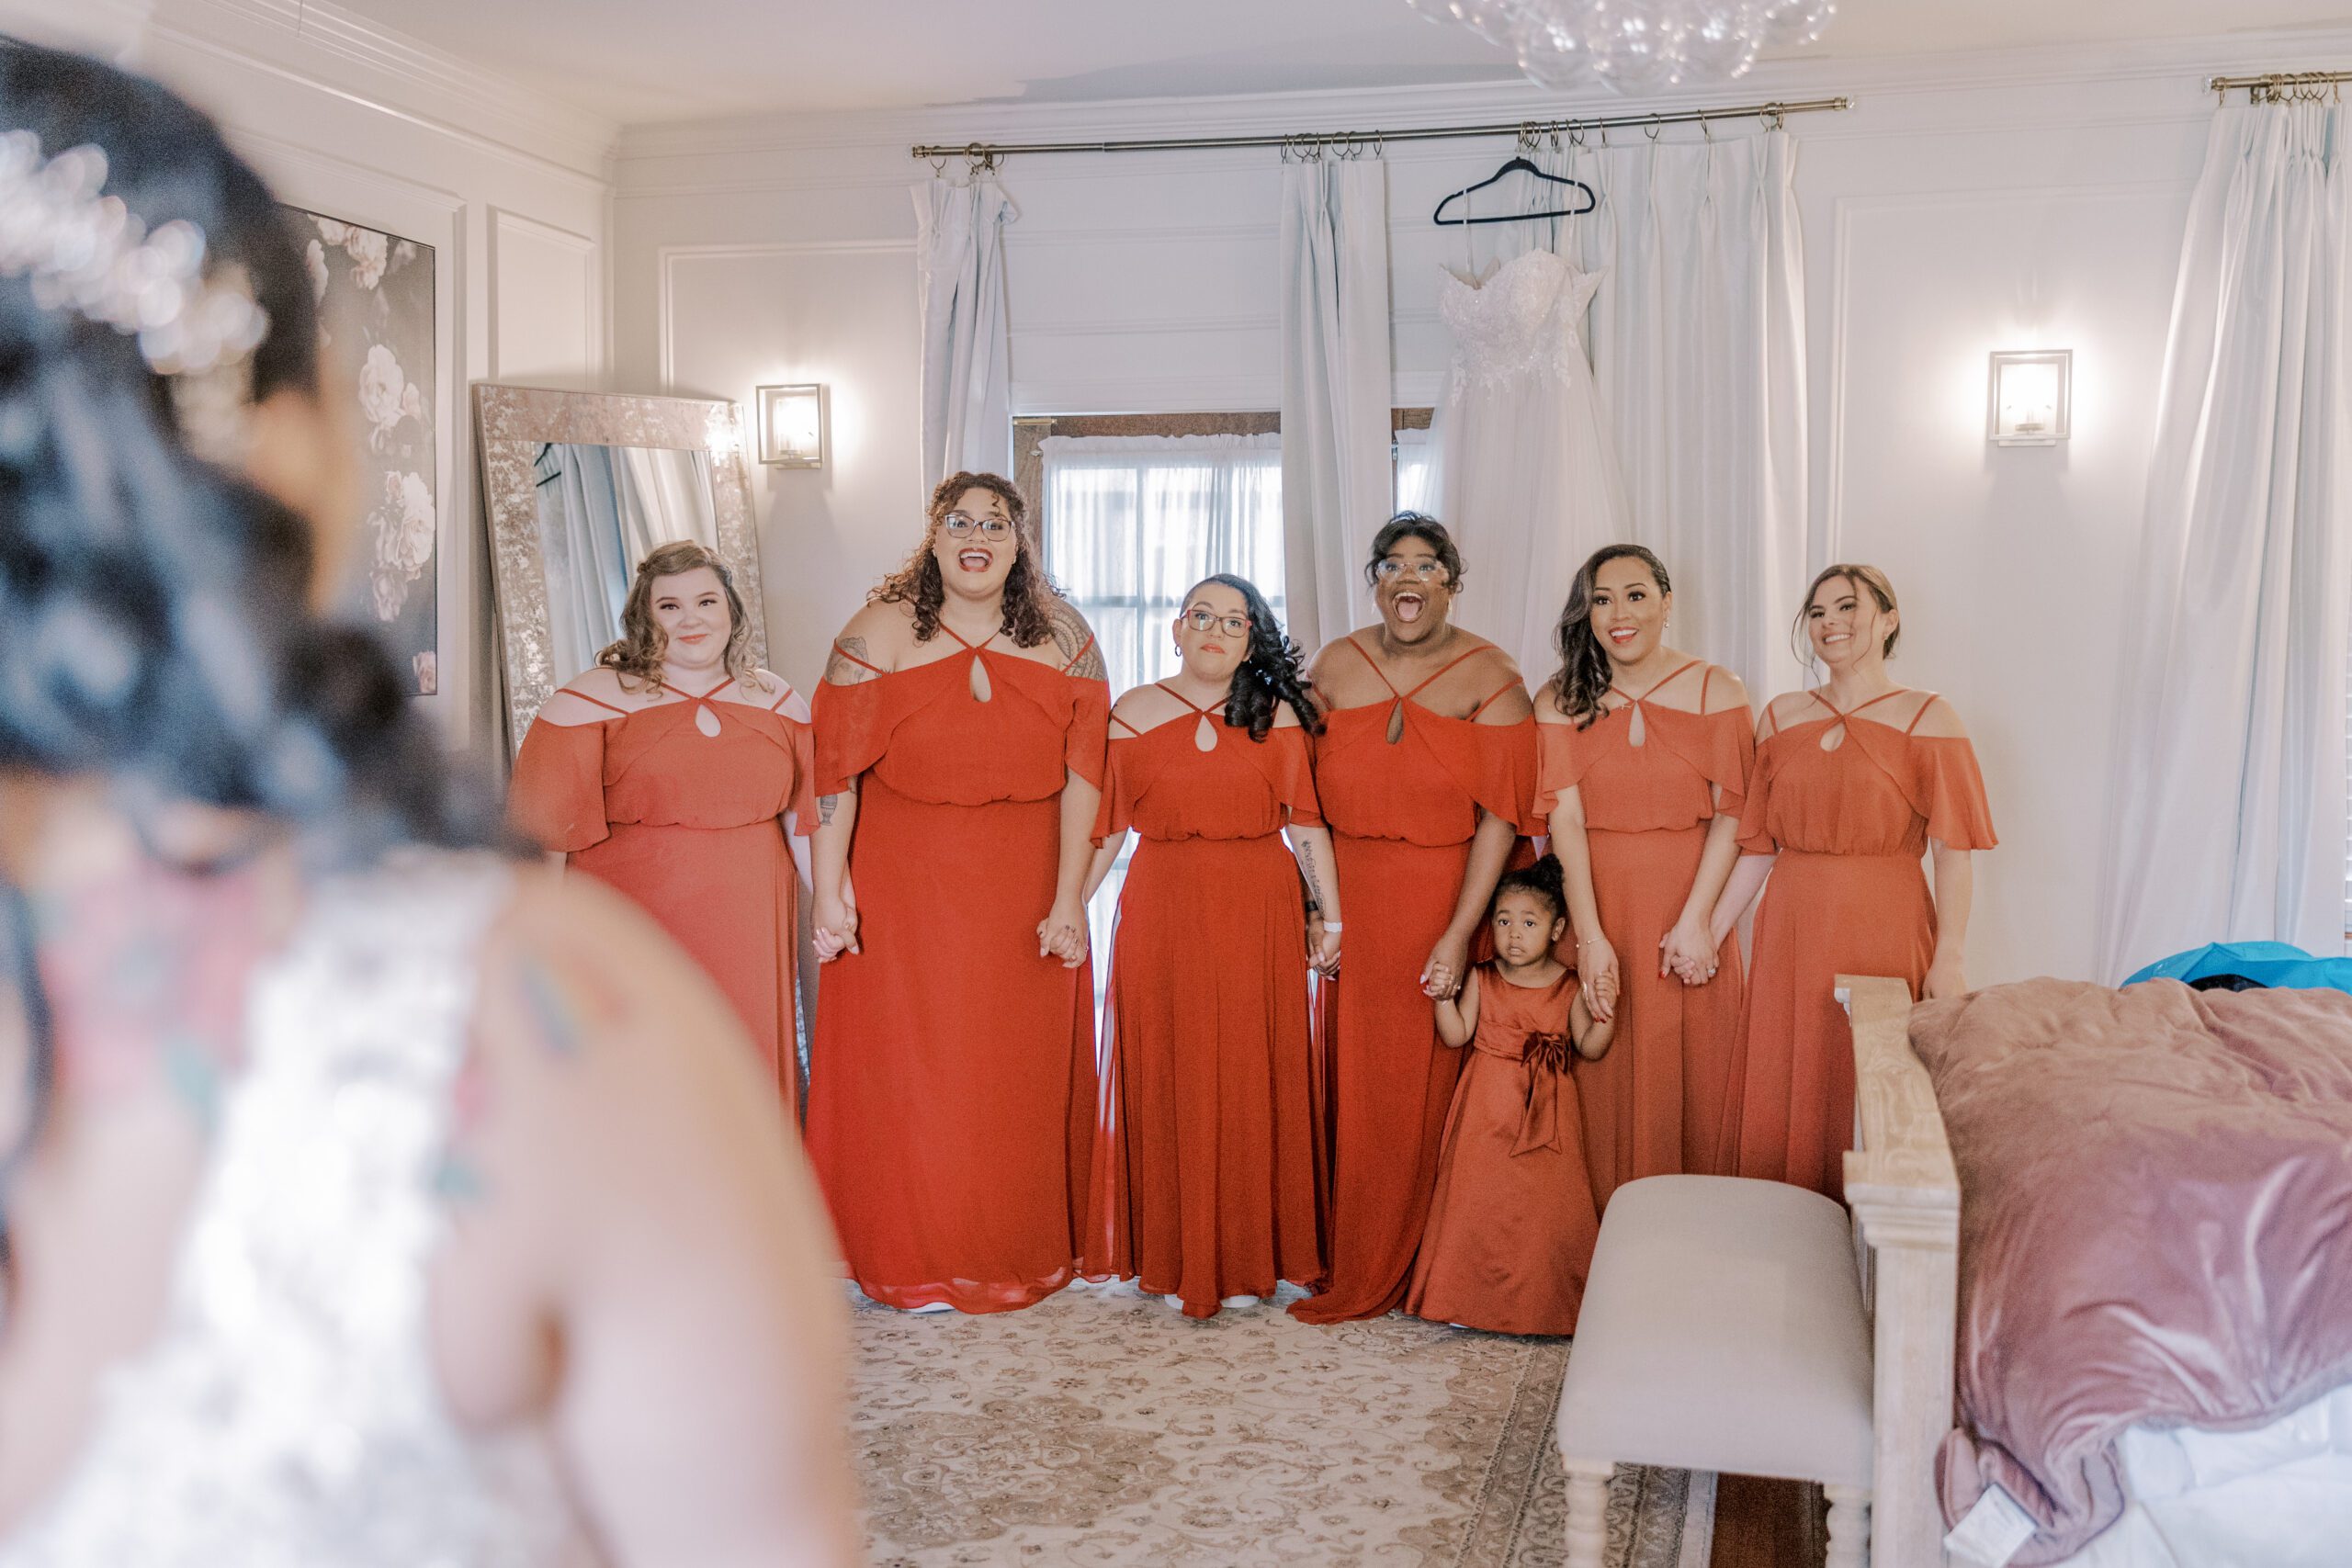 Bridesmaids in their orange dresses, along side a young girl also wearing an orange dress, all with excited expressions on their faces looking at the bride in her wedding gown